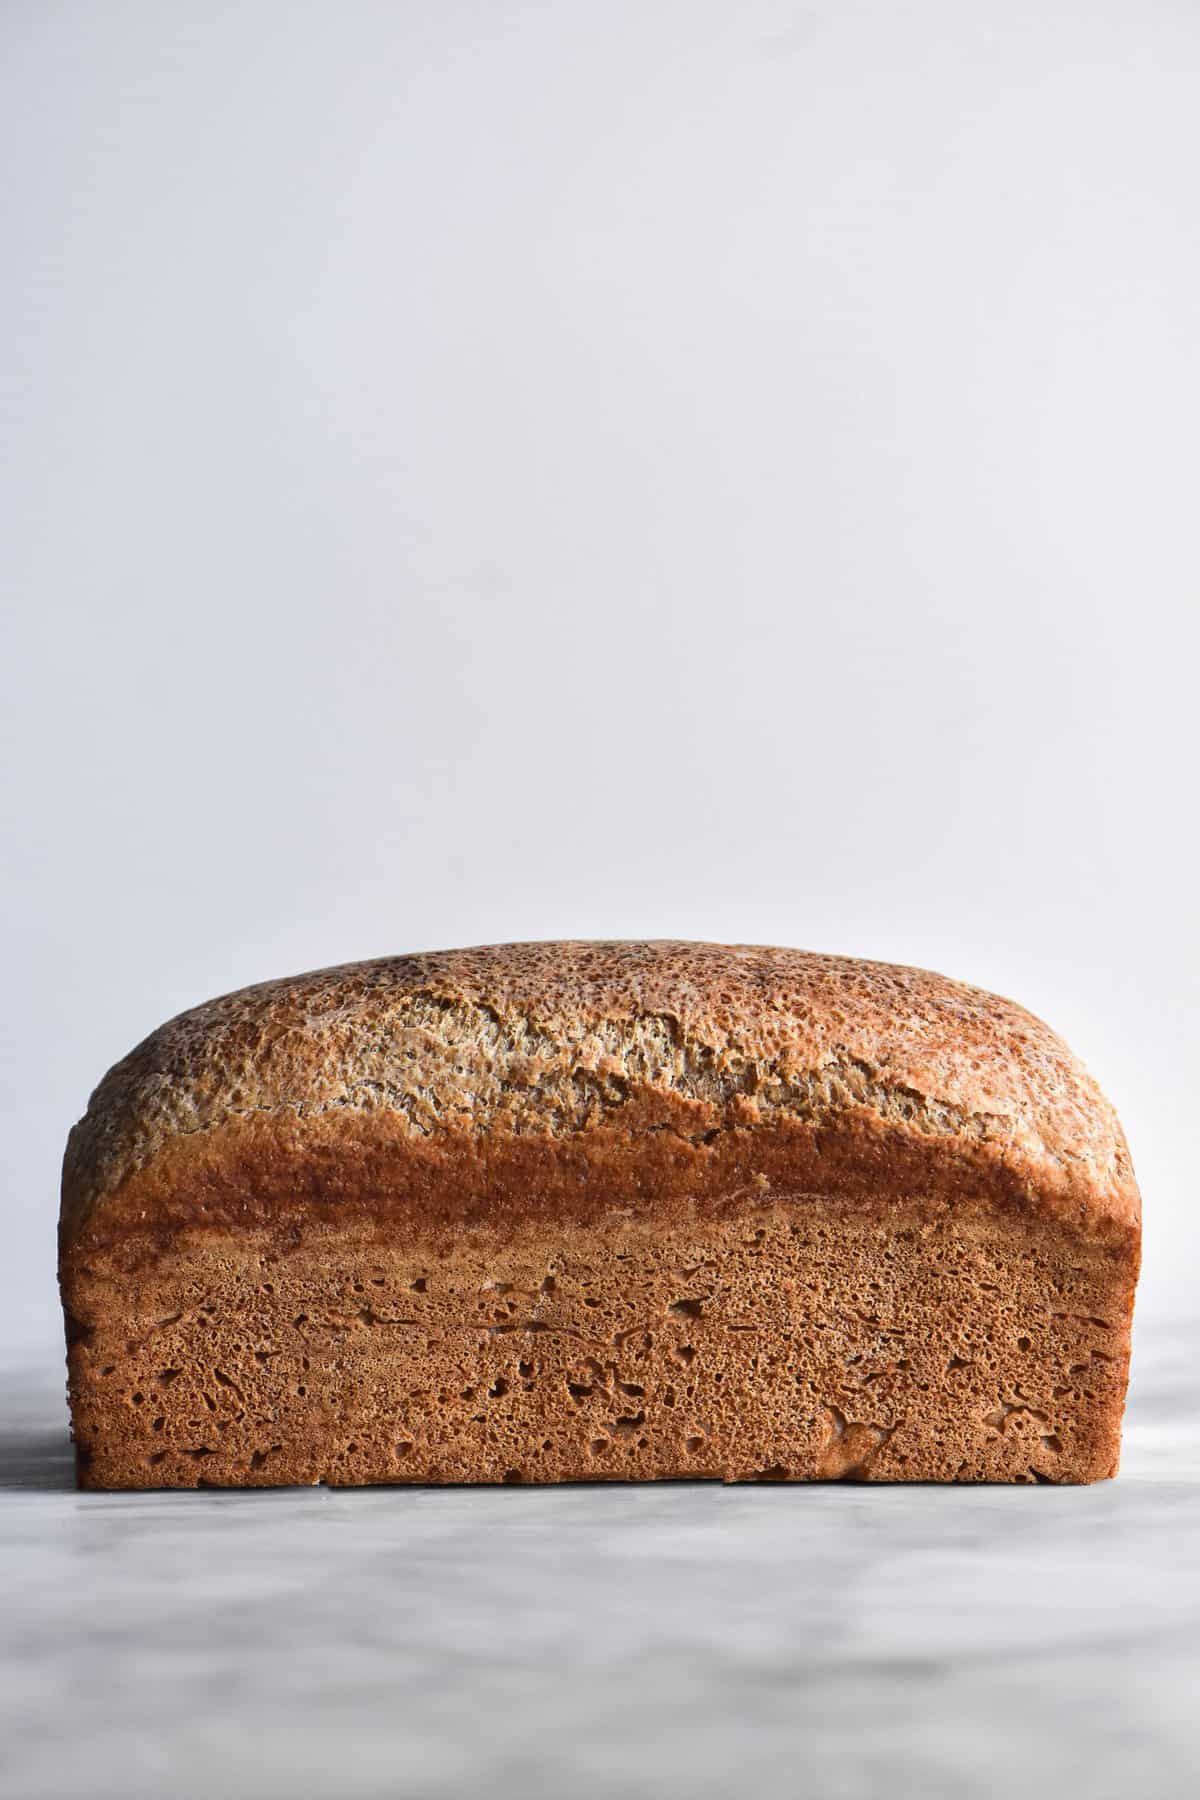 A side on view of an enriched yeasted loaf of gluten free bread. It sits atop a white marble table against a white backdrop